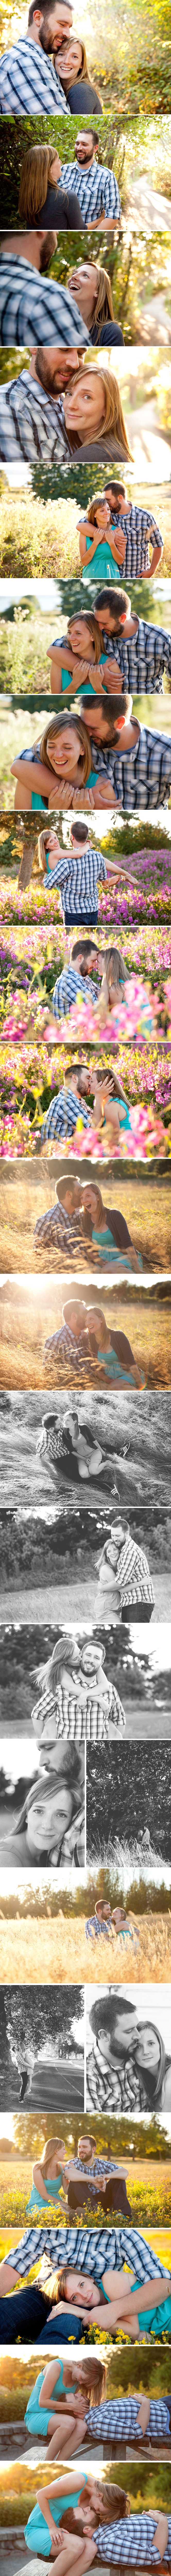 discovery park engagement